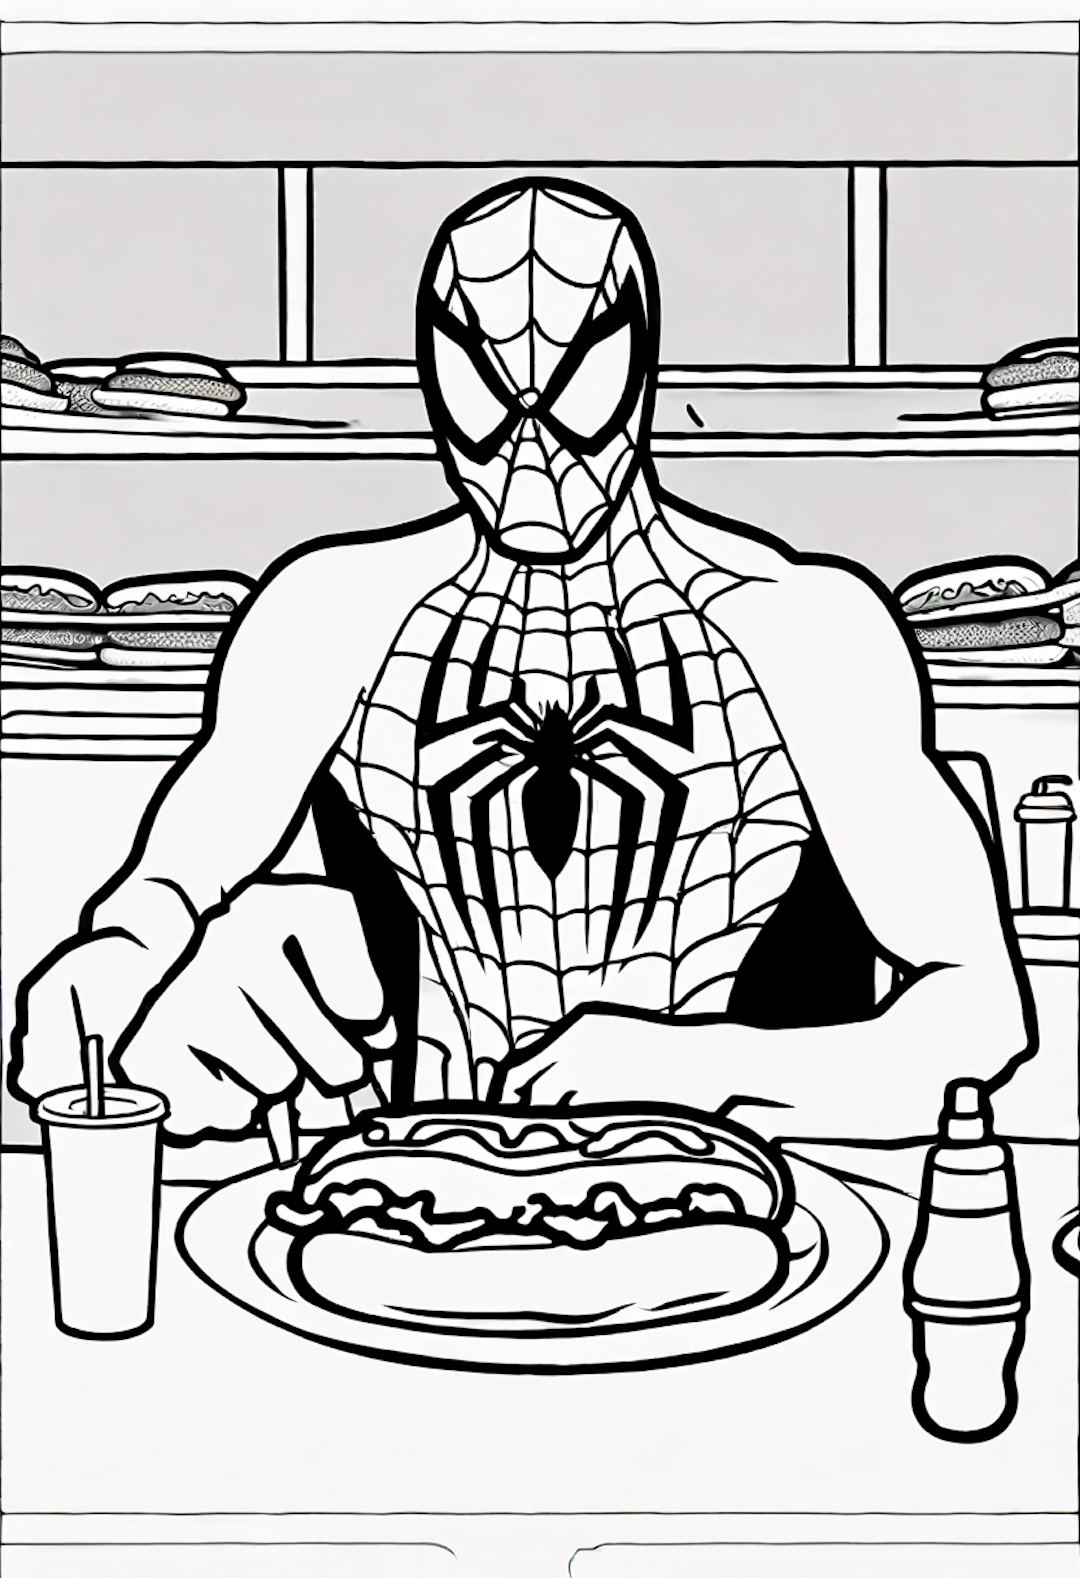 Spiderman In A Hot Dog Eating Contest At Coney Island